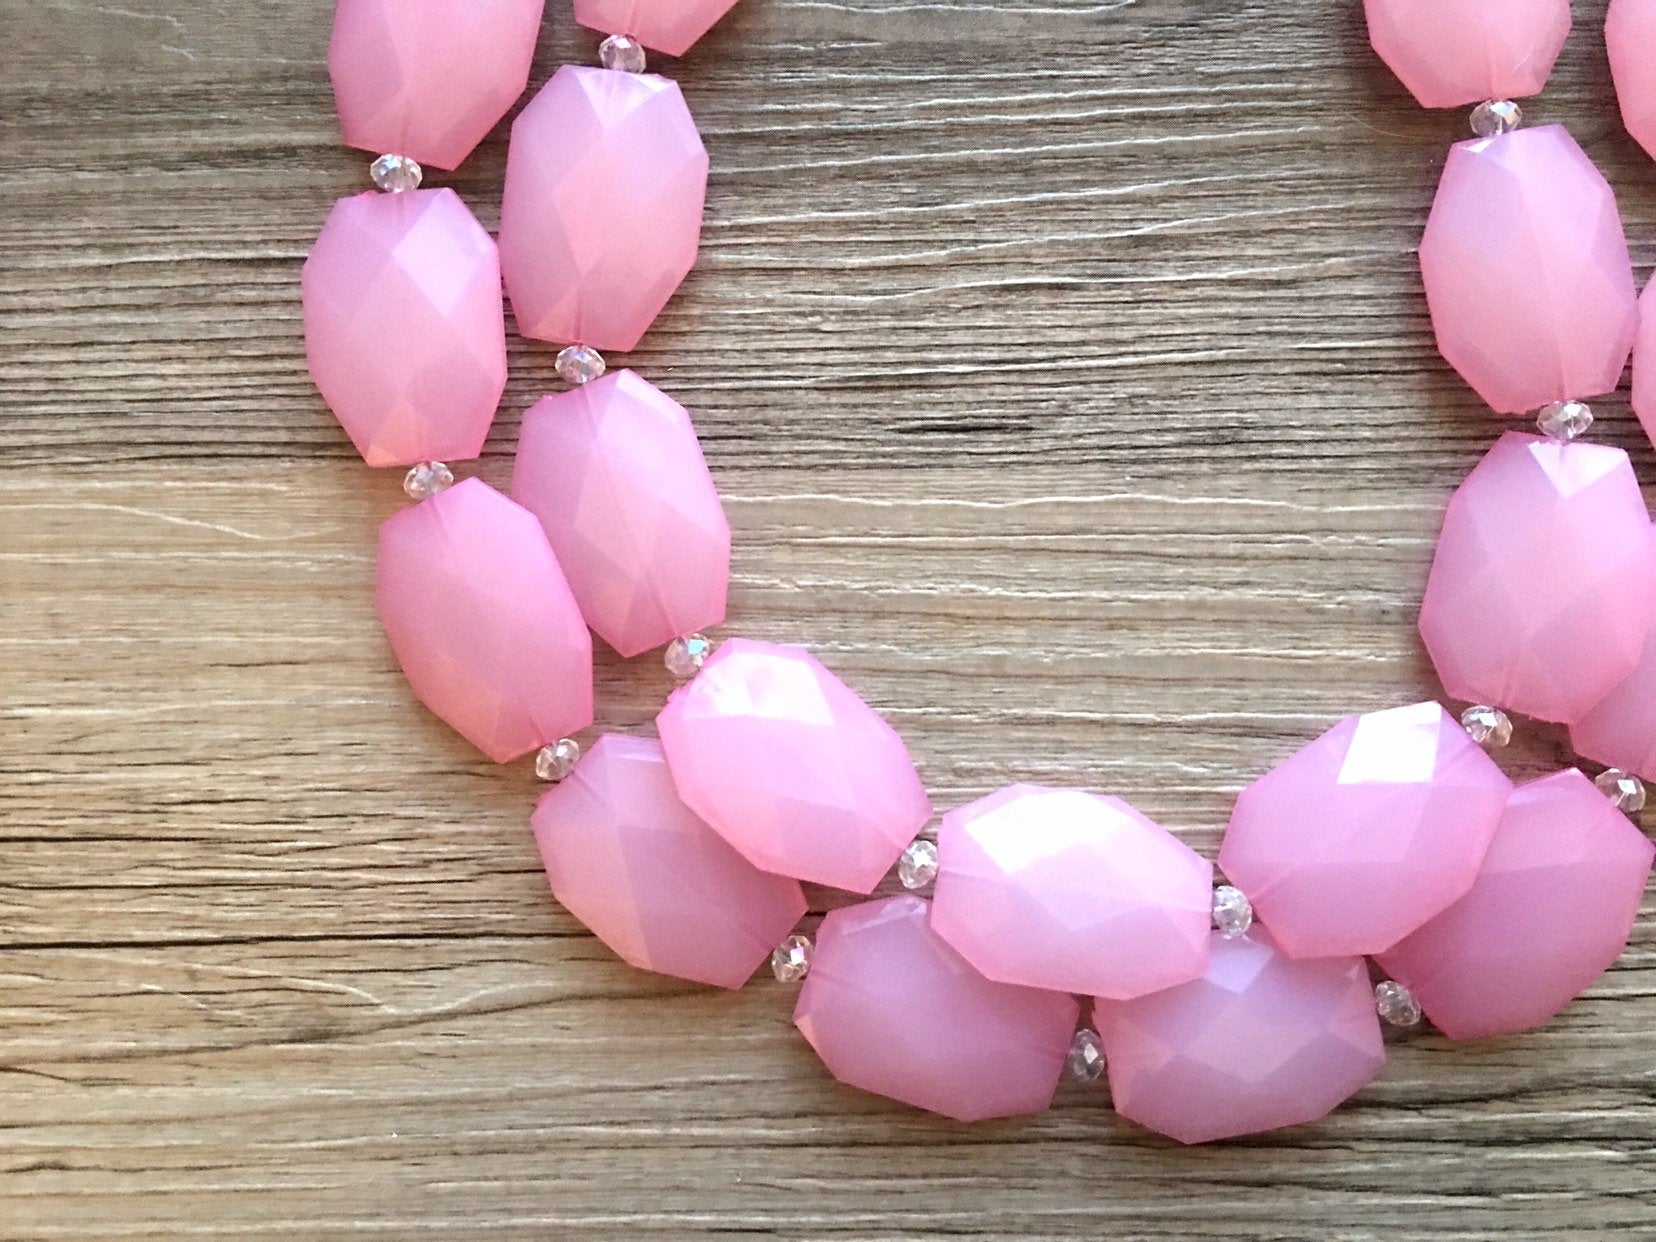 Natural Hot Pink Chalcedony Heart Shape Plain Smooth 11-12mm Size Beads  strand 8 inches long Untreated Genuine Jewellery making Beads